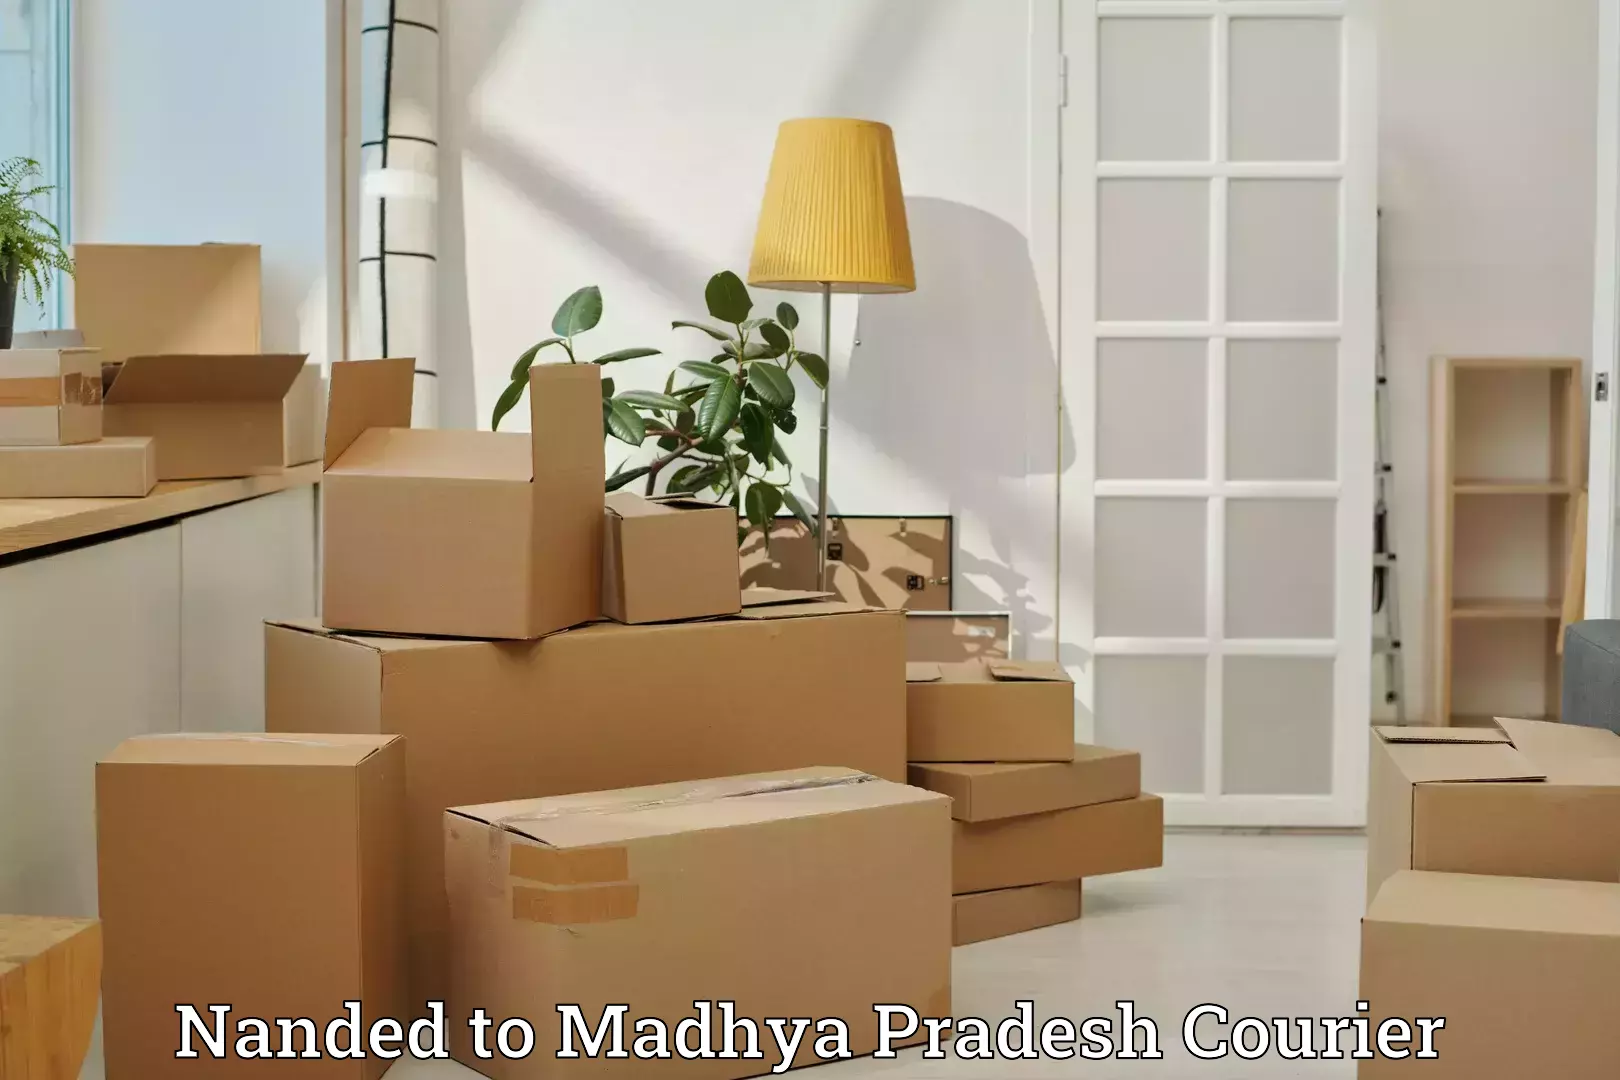 Luggage transport consultancy Nanded to Maheshwar